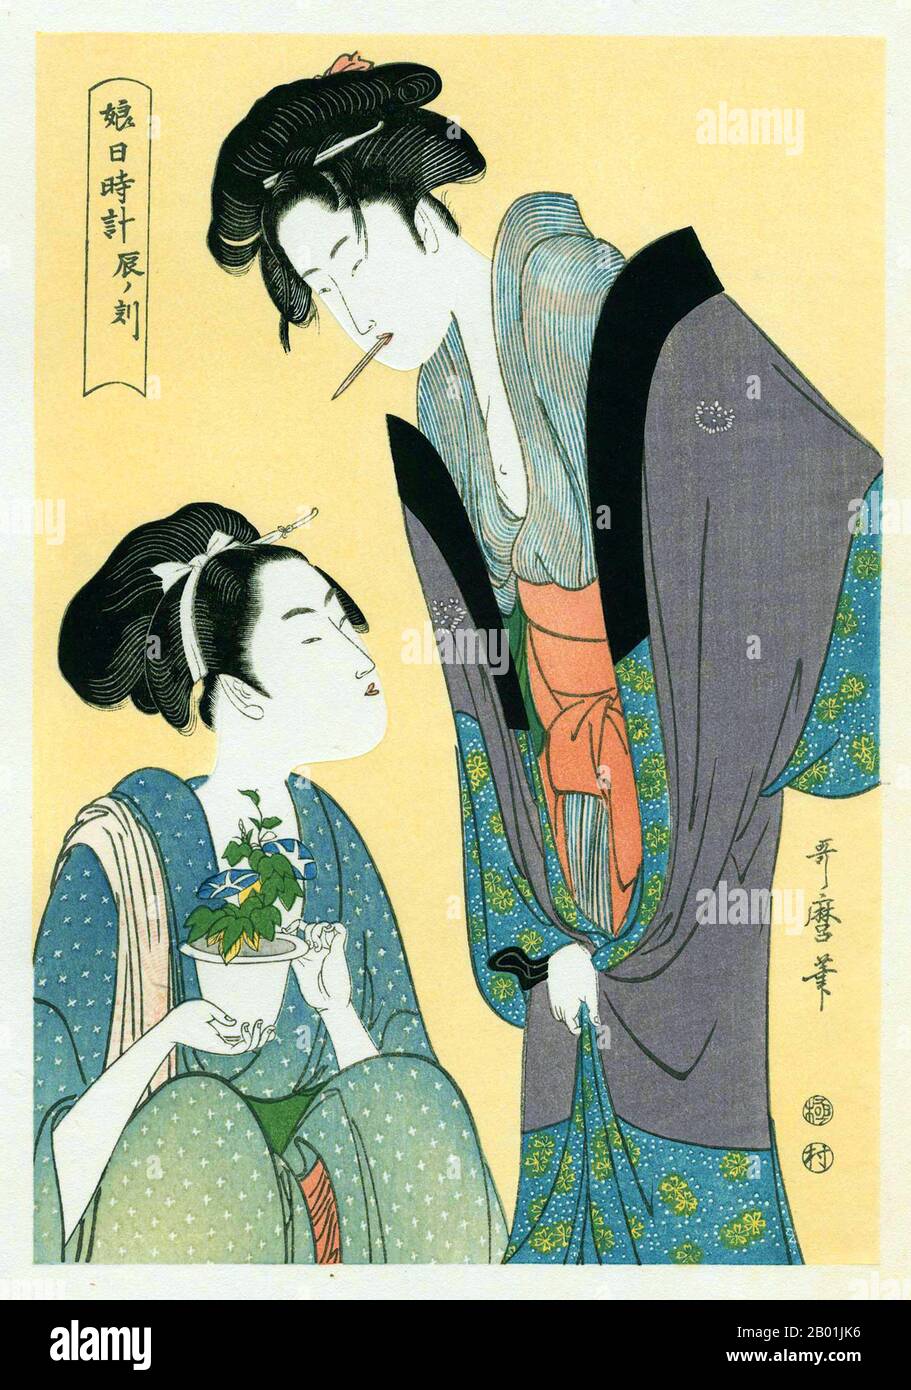 Japan: 'Hour of the Hare'. Ukiyo-e woodblock print from the series 'Twelve Hours of the Green Houses' by Kitagawa Utamaro, (c. 1753 - 31 October 1806), 1794.  Kitagawa Utamaro was a Japanese printmaker and painter, who is considered one of the greatest artists of woodblock prints (ukiyo-e). He is known especially for his masterfully composed studies of women, known as bijinga. He also produced nature studies, particularly illustrated books of insects. Stock Photo